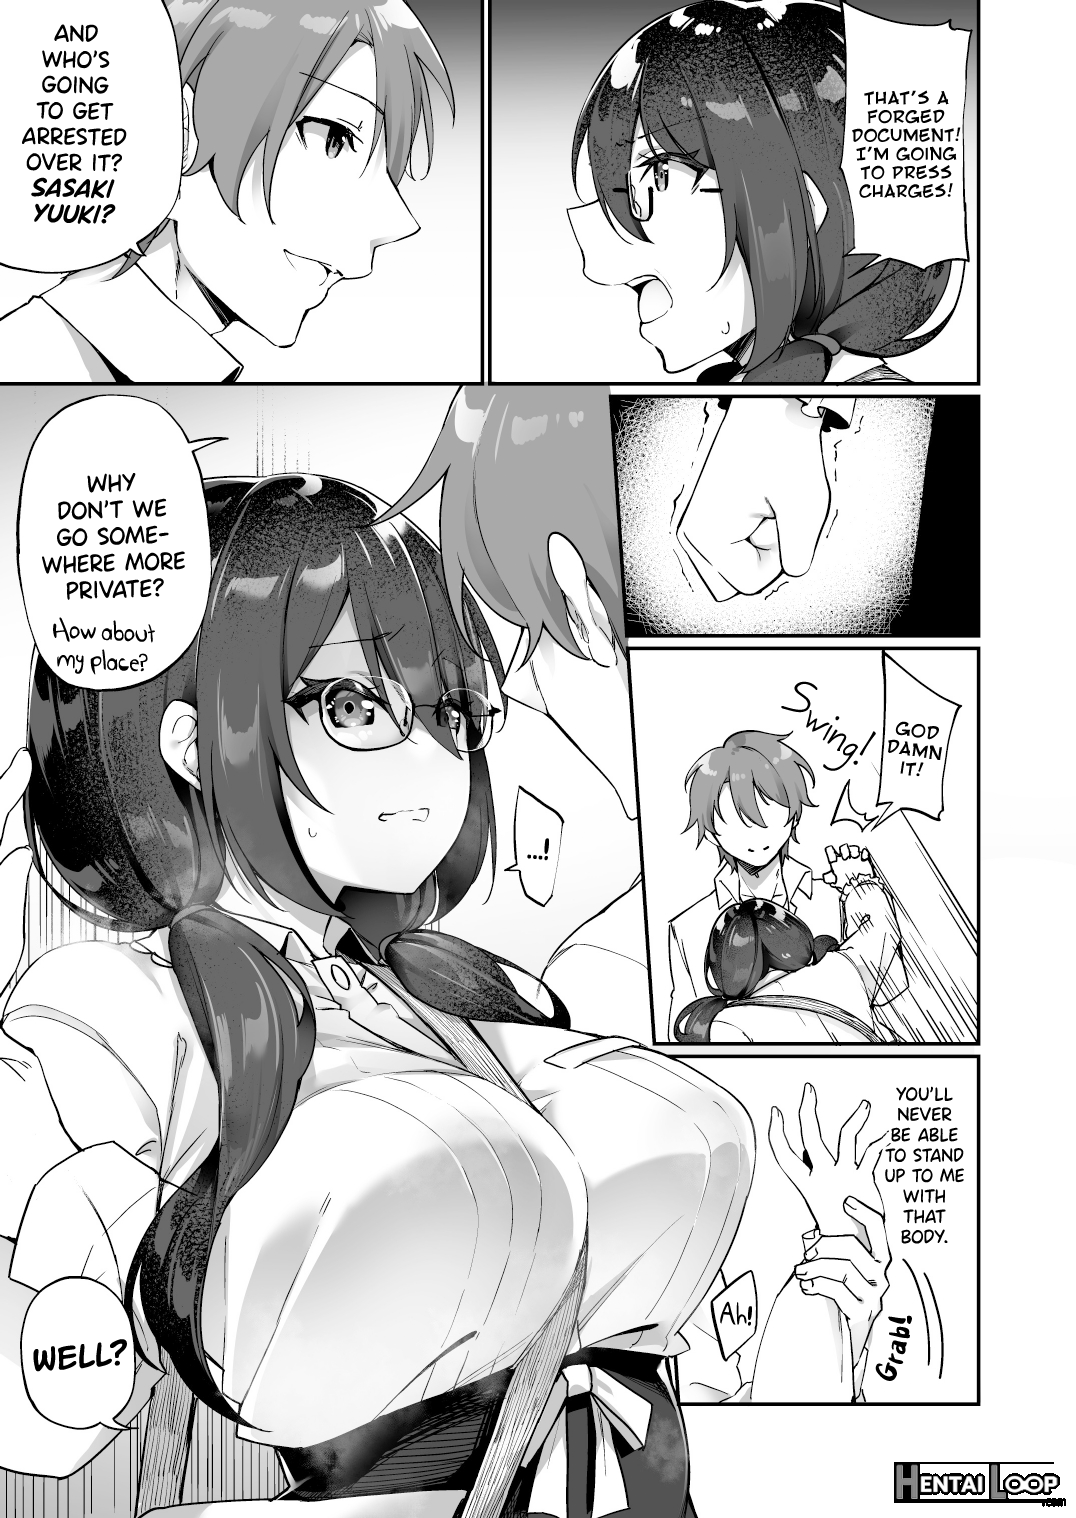 My Voluptuous Yandere Kouhai Who Gets Turned On Just By Hearing My Voice Switched Bodies With Me! page 10